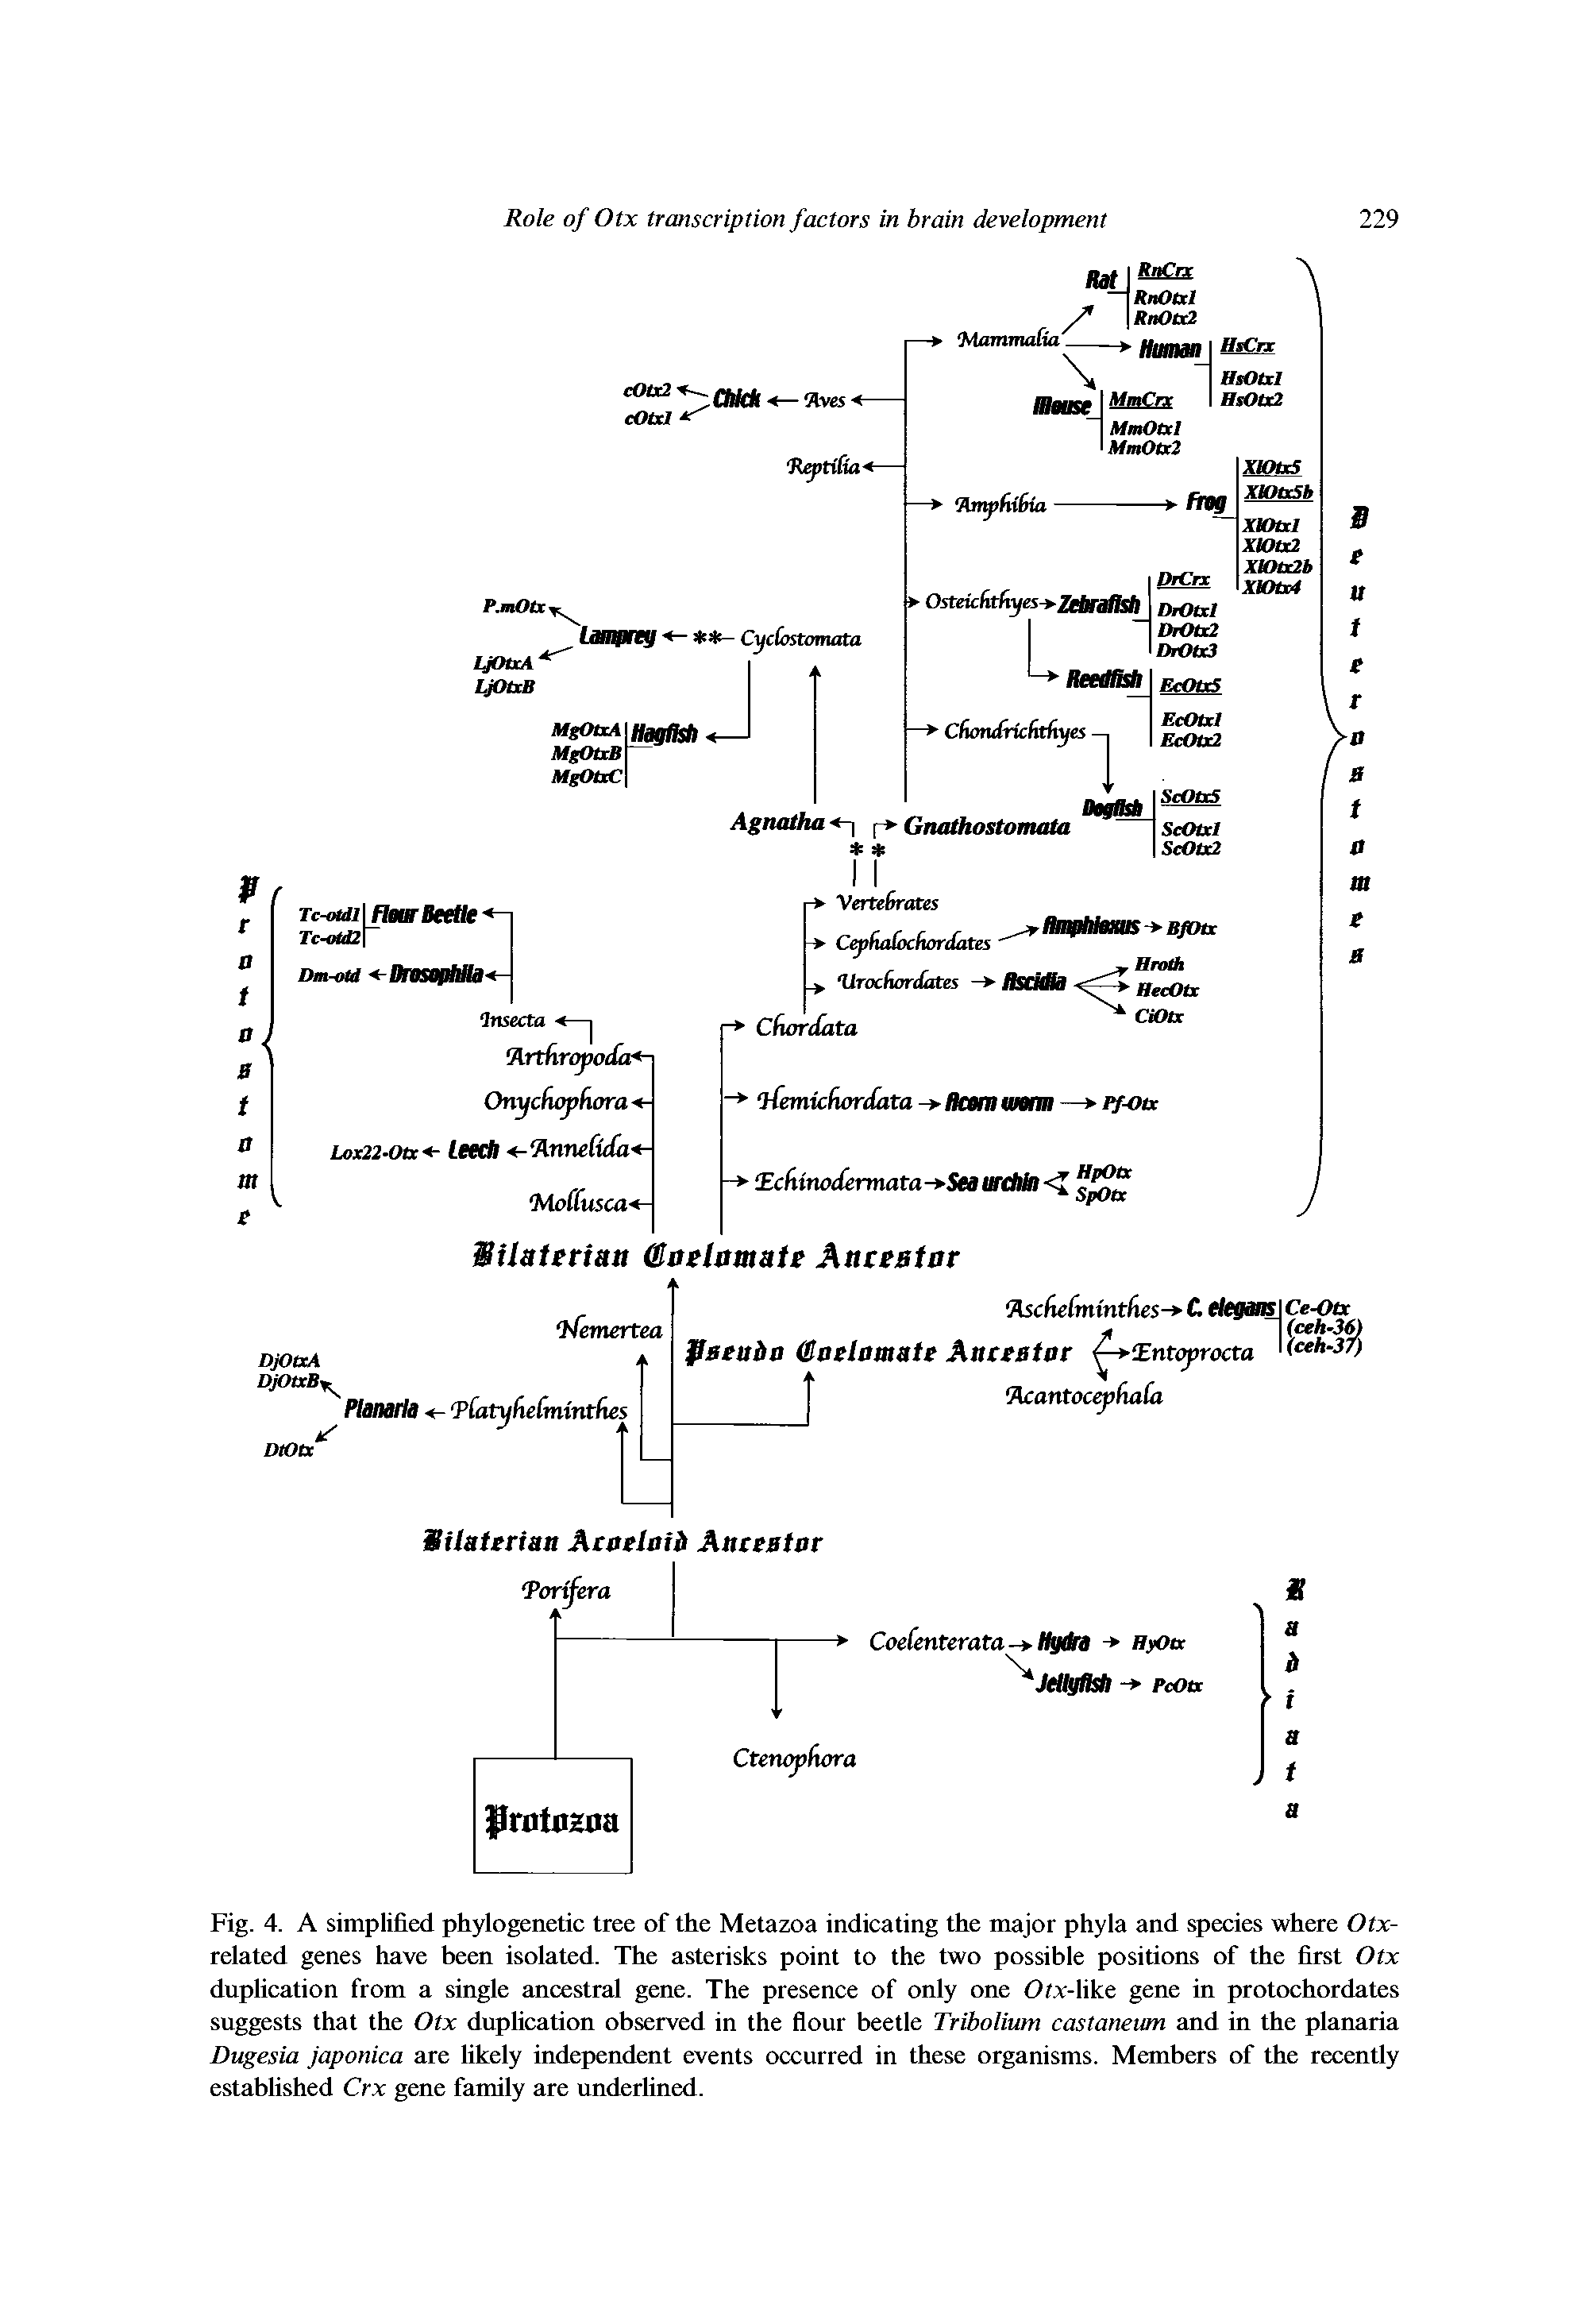 Fig. 4. A simplified phylogenetic tree of the Metazoa indicating the major phyla and species where Otx-related genes have been isolated. The asterisks point to the two possible positions of the first Otx duplication from a single ancestral gene. The presence of only one Otx-like gene in protochordates suggests that the Otx duplication observed in the flour beetle Tribolium castaneum and in the planaria Dugesia japonica are likely independent events occurred in these organisms. Members of the recently established Crx gene family are underlined.